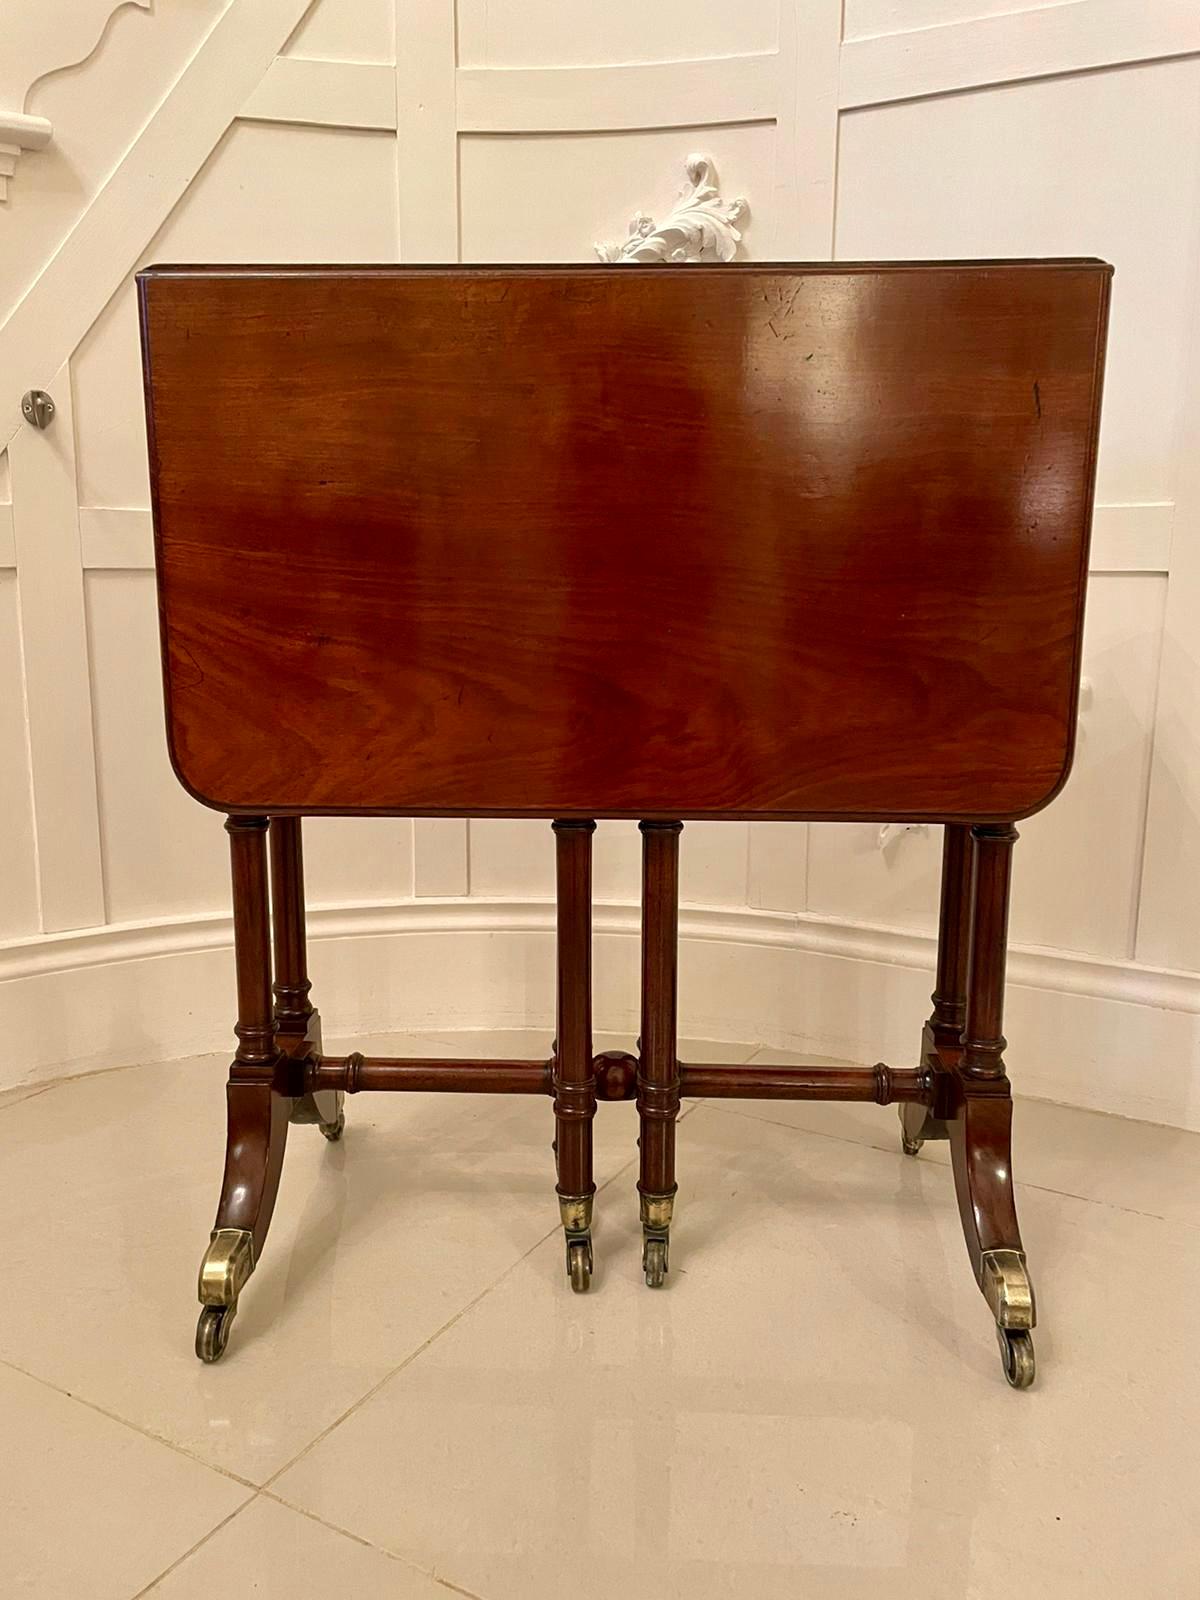 Antique Early 19th Century George III Mahogany Spider Leg Drop-Leaf Table For Sale 4